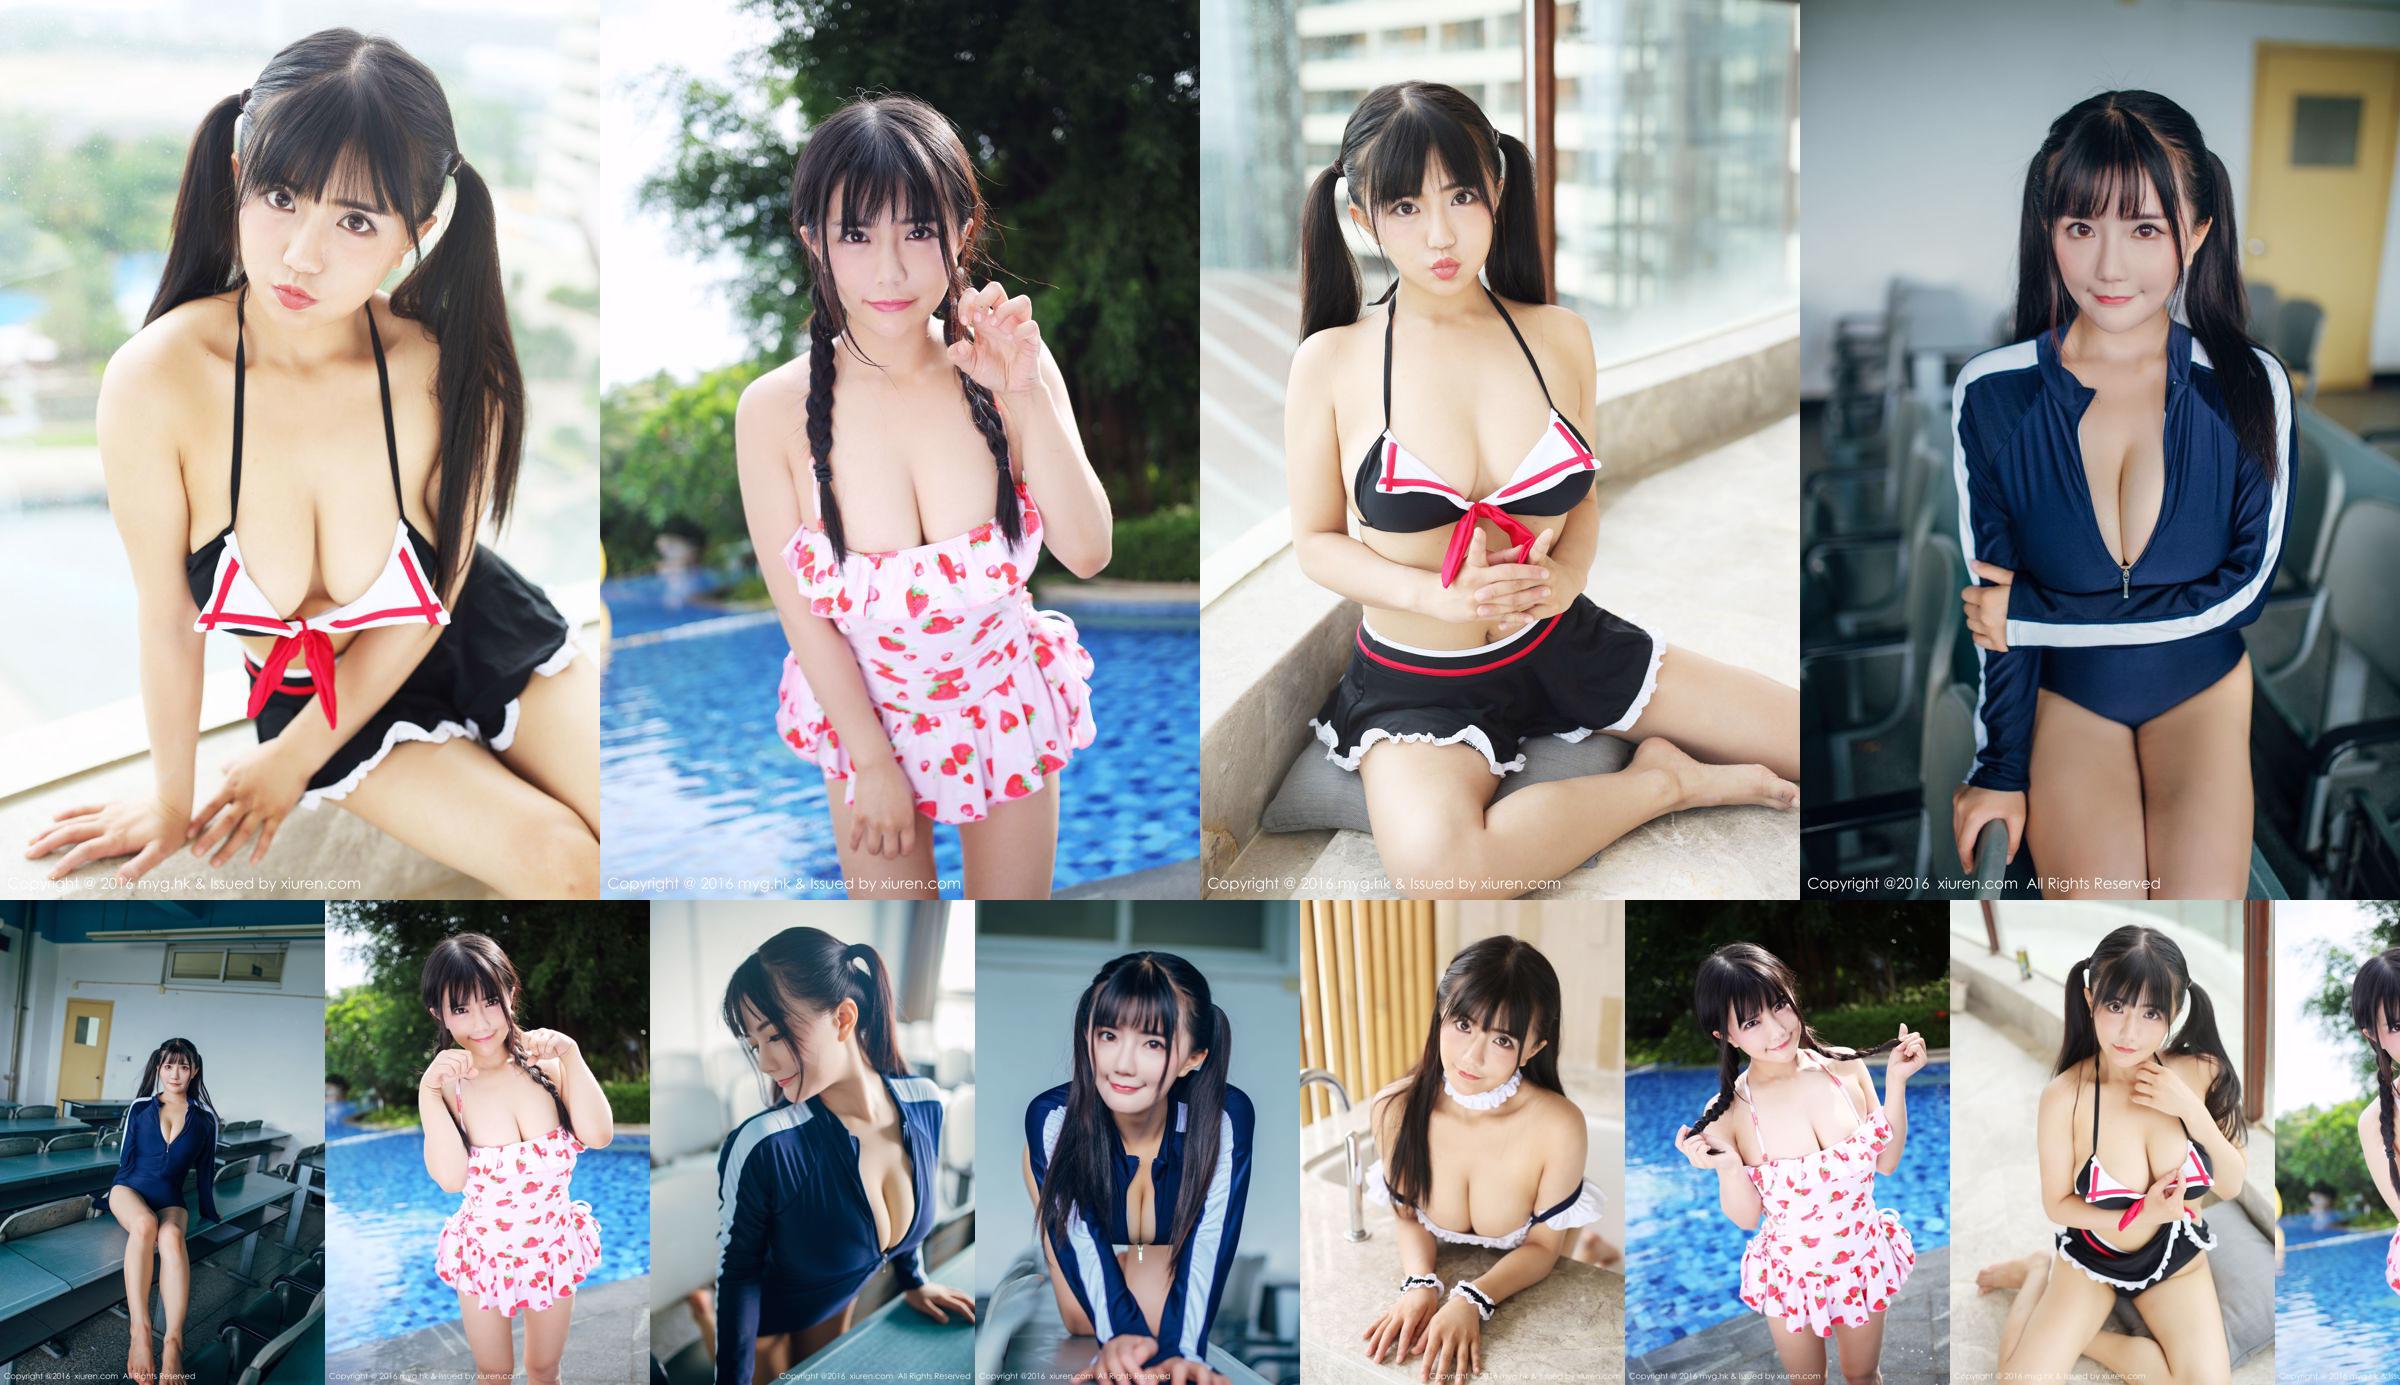 Aguai Kiddo "Young Beauty with Big Tits" [MyGirl] Vol.226 No.489442 Page 1